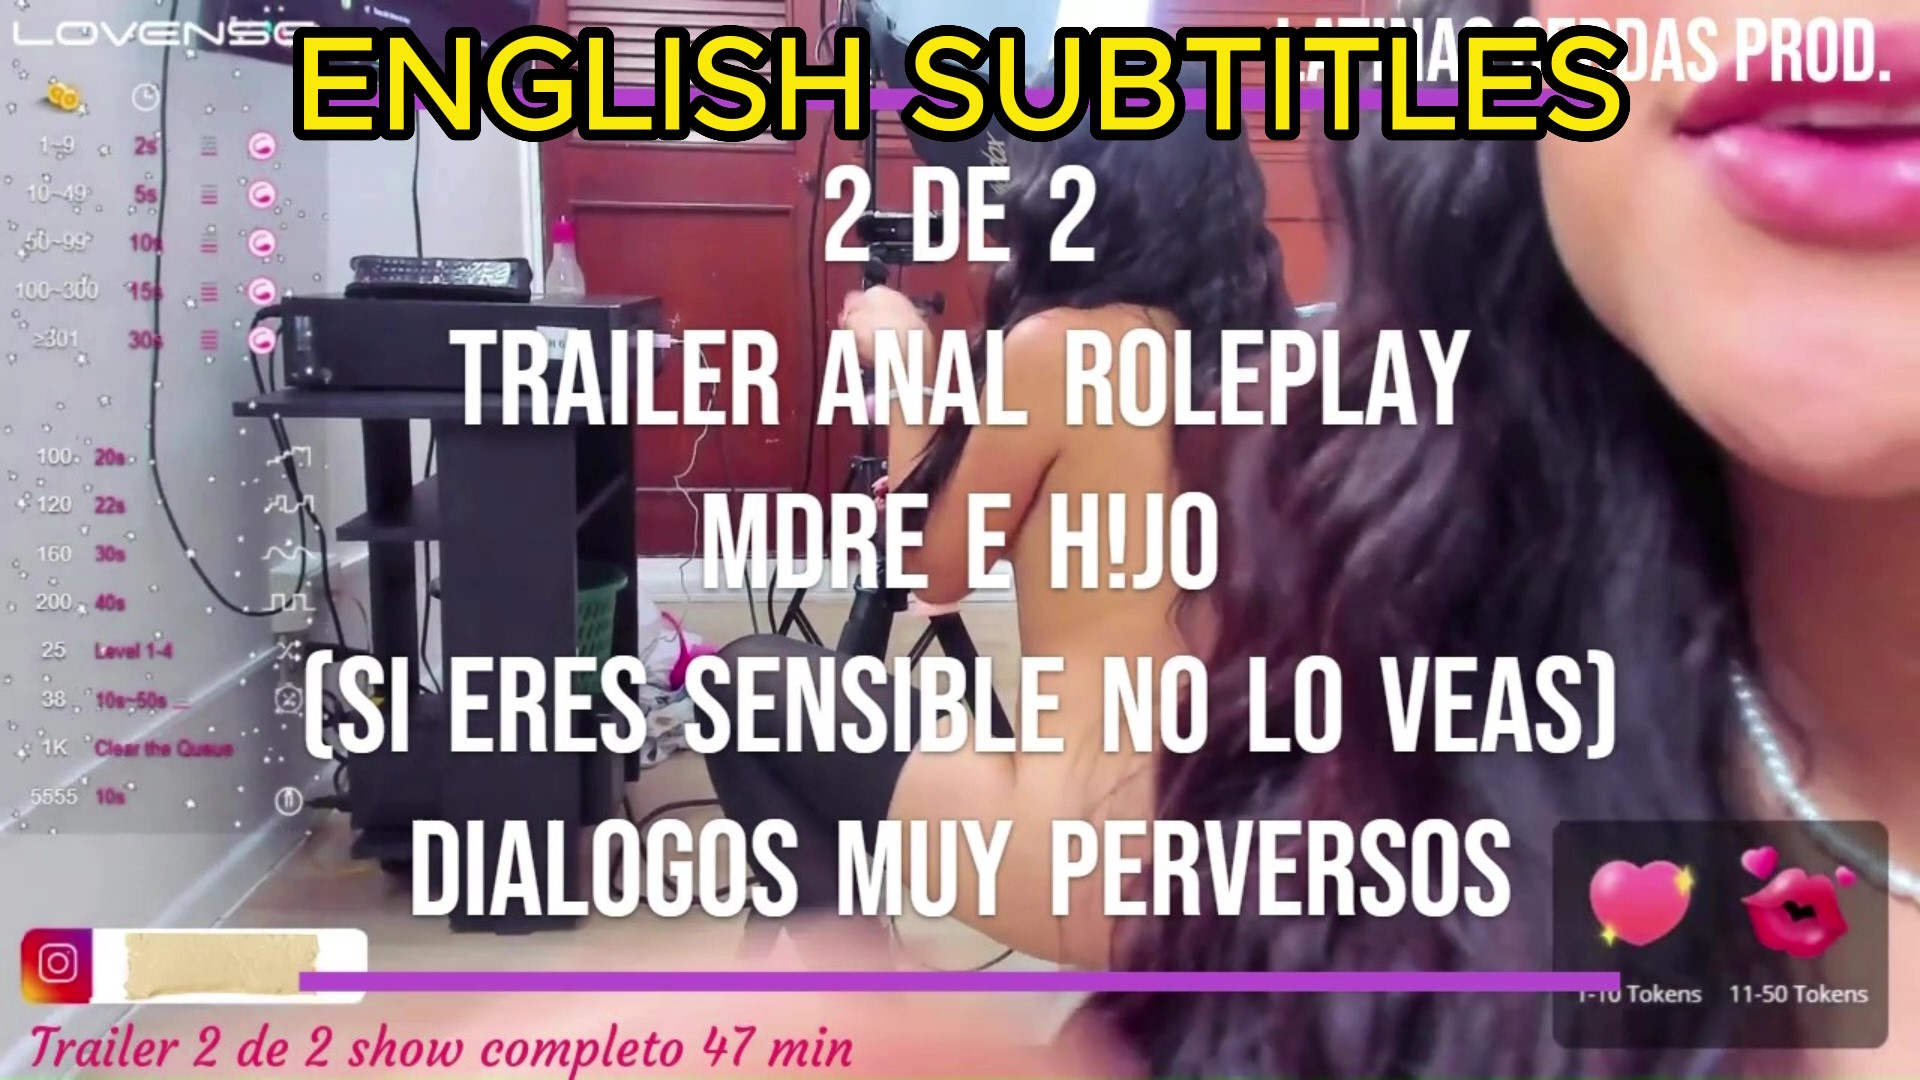 47min TRAILER ANAL ROLEPLAY MTHER ENGLISH SUBTITLES